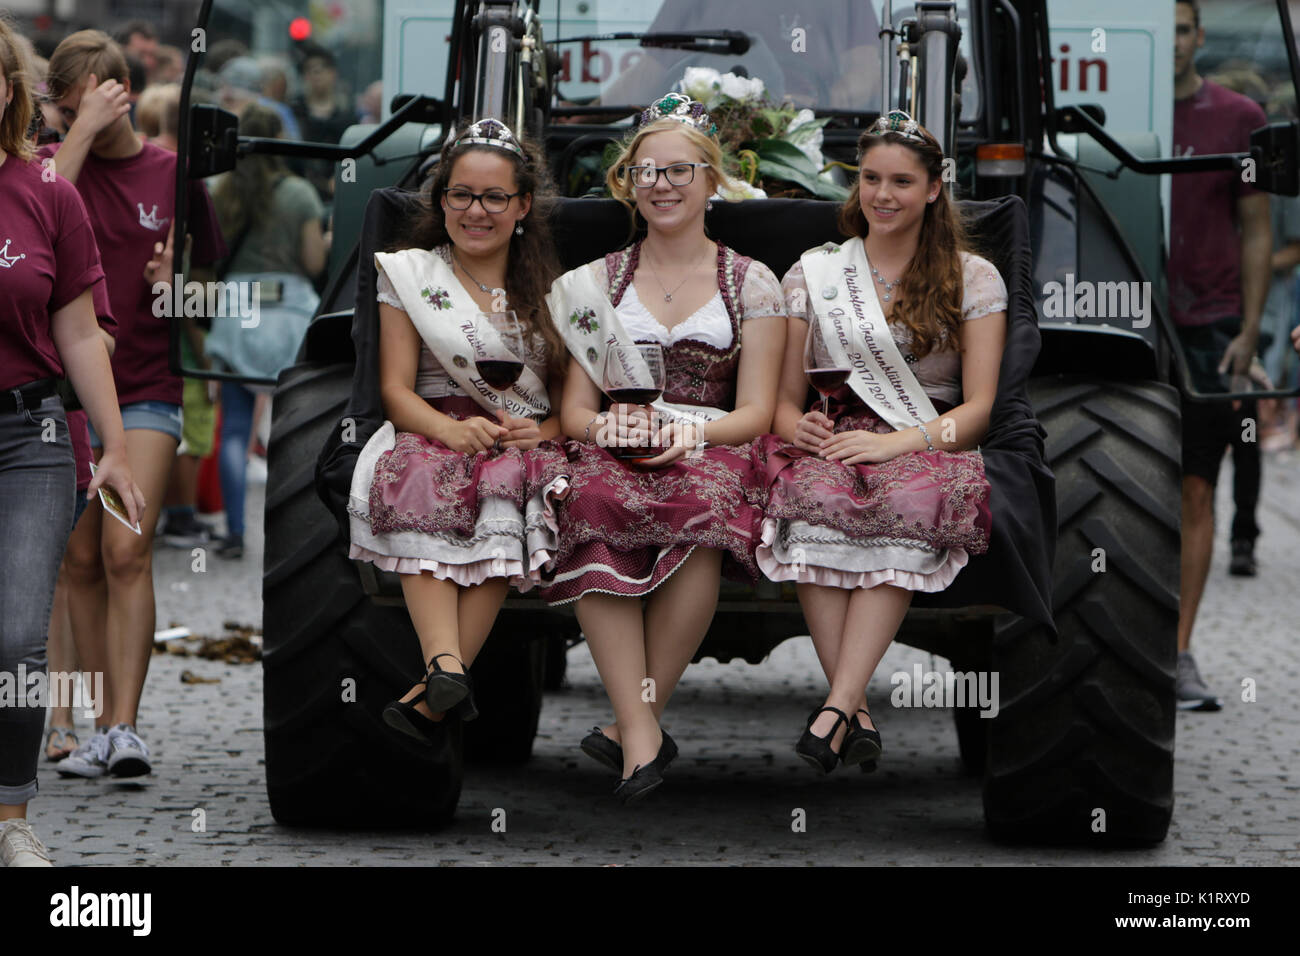 Worms, Germany. 27th August 2017. The Traubenbluten princesses from Westhofen sit on the front of a tractor. The first highlight of the 2017 Backfischfest was the big parade through the city of Worms with over 80 groups and floats. Community groups, music groups and business from Worms and further afield took part. Credit: Michael Debets/Alamy Live News Stock Photo